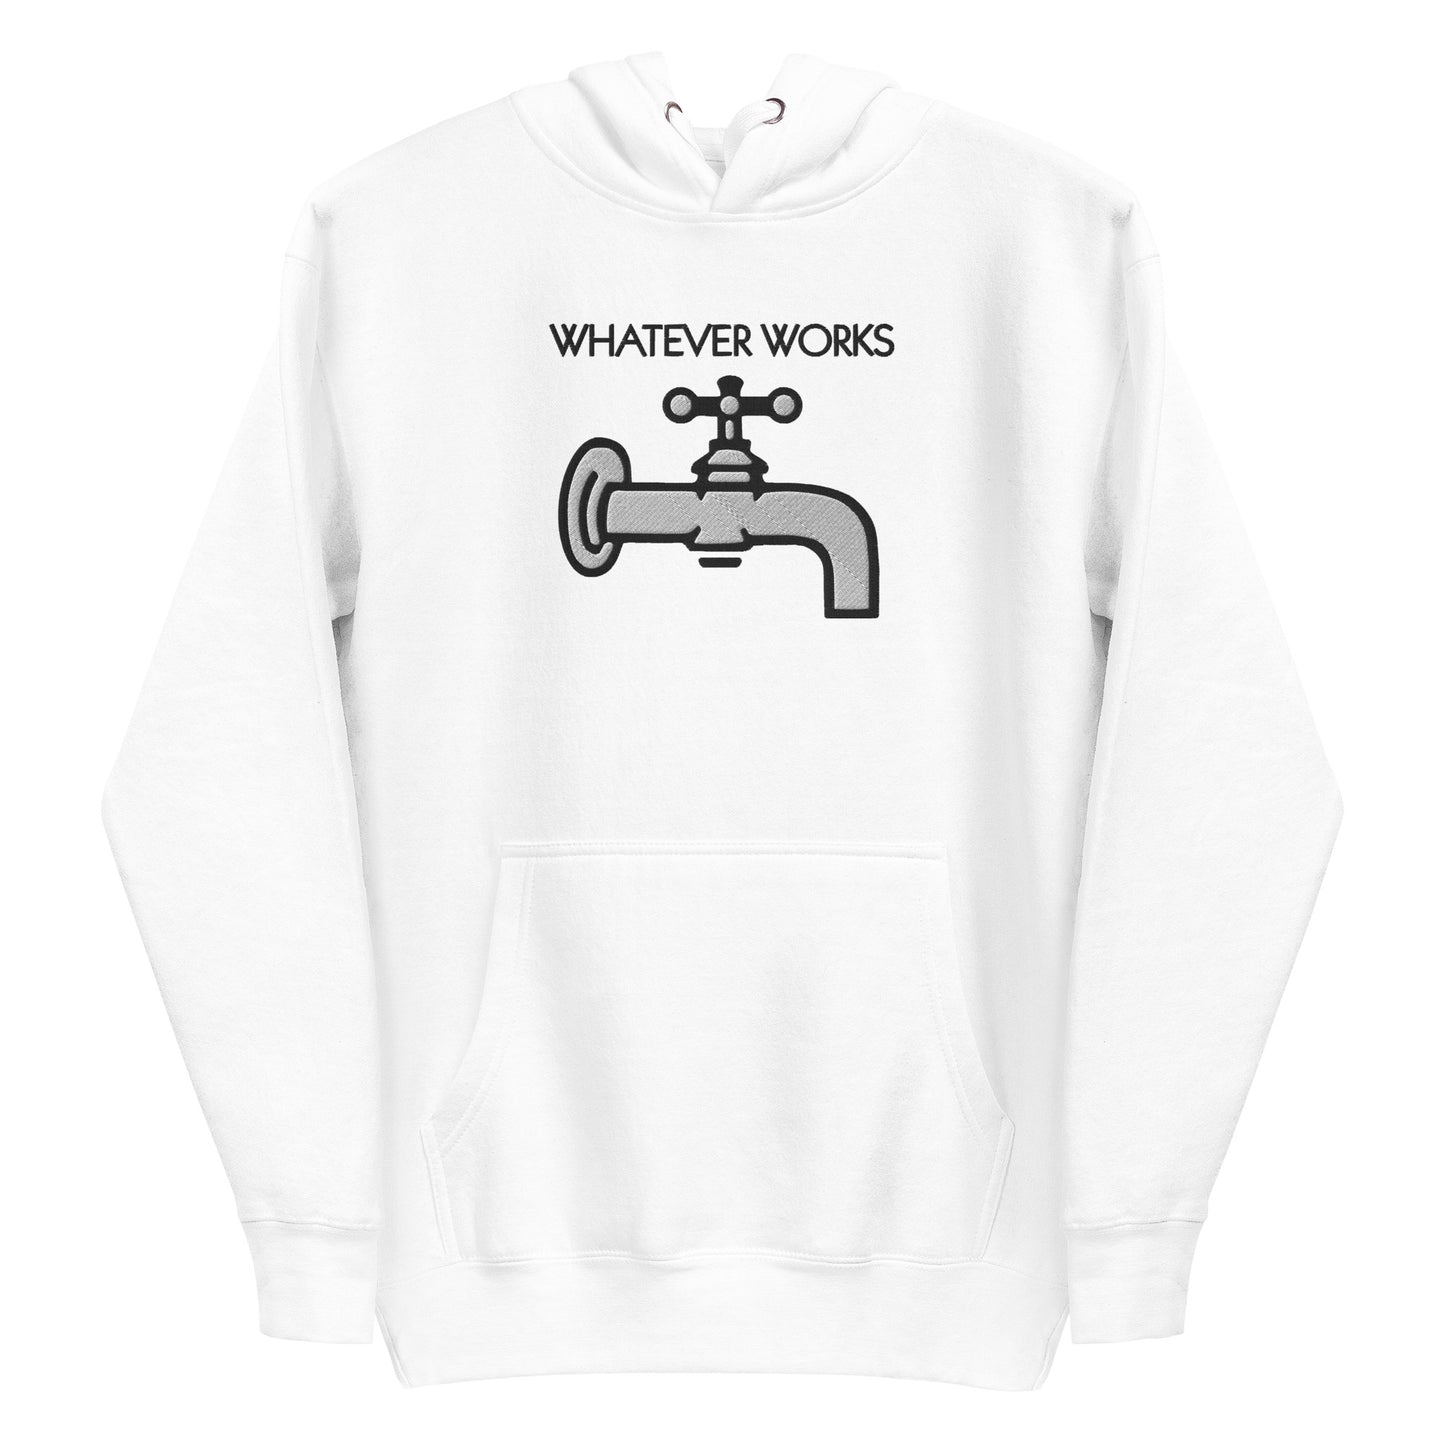 Whatever Works embroidered hoodie